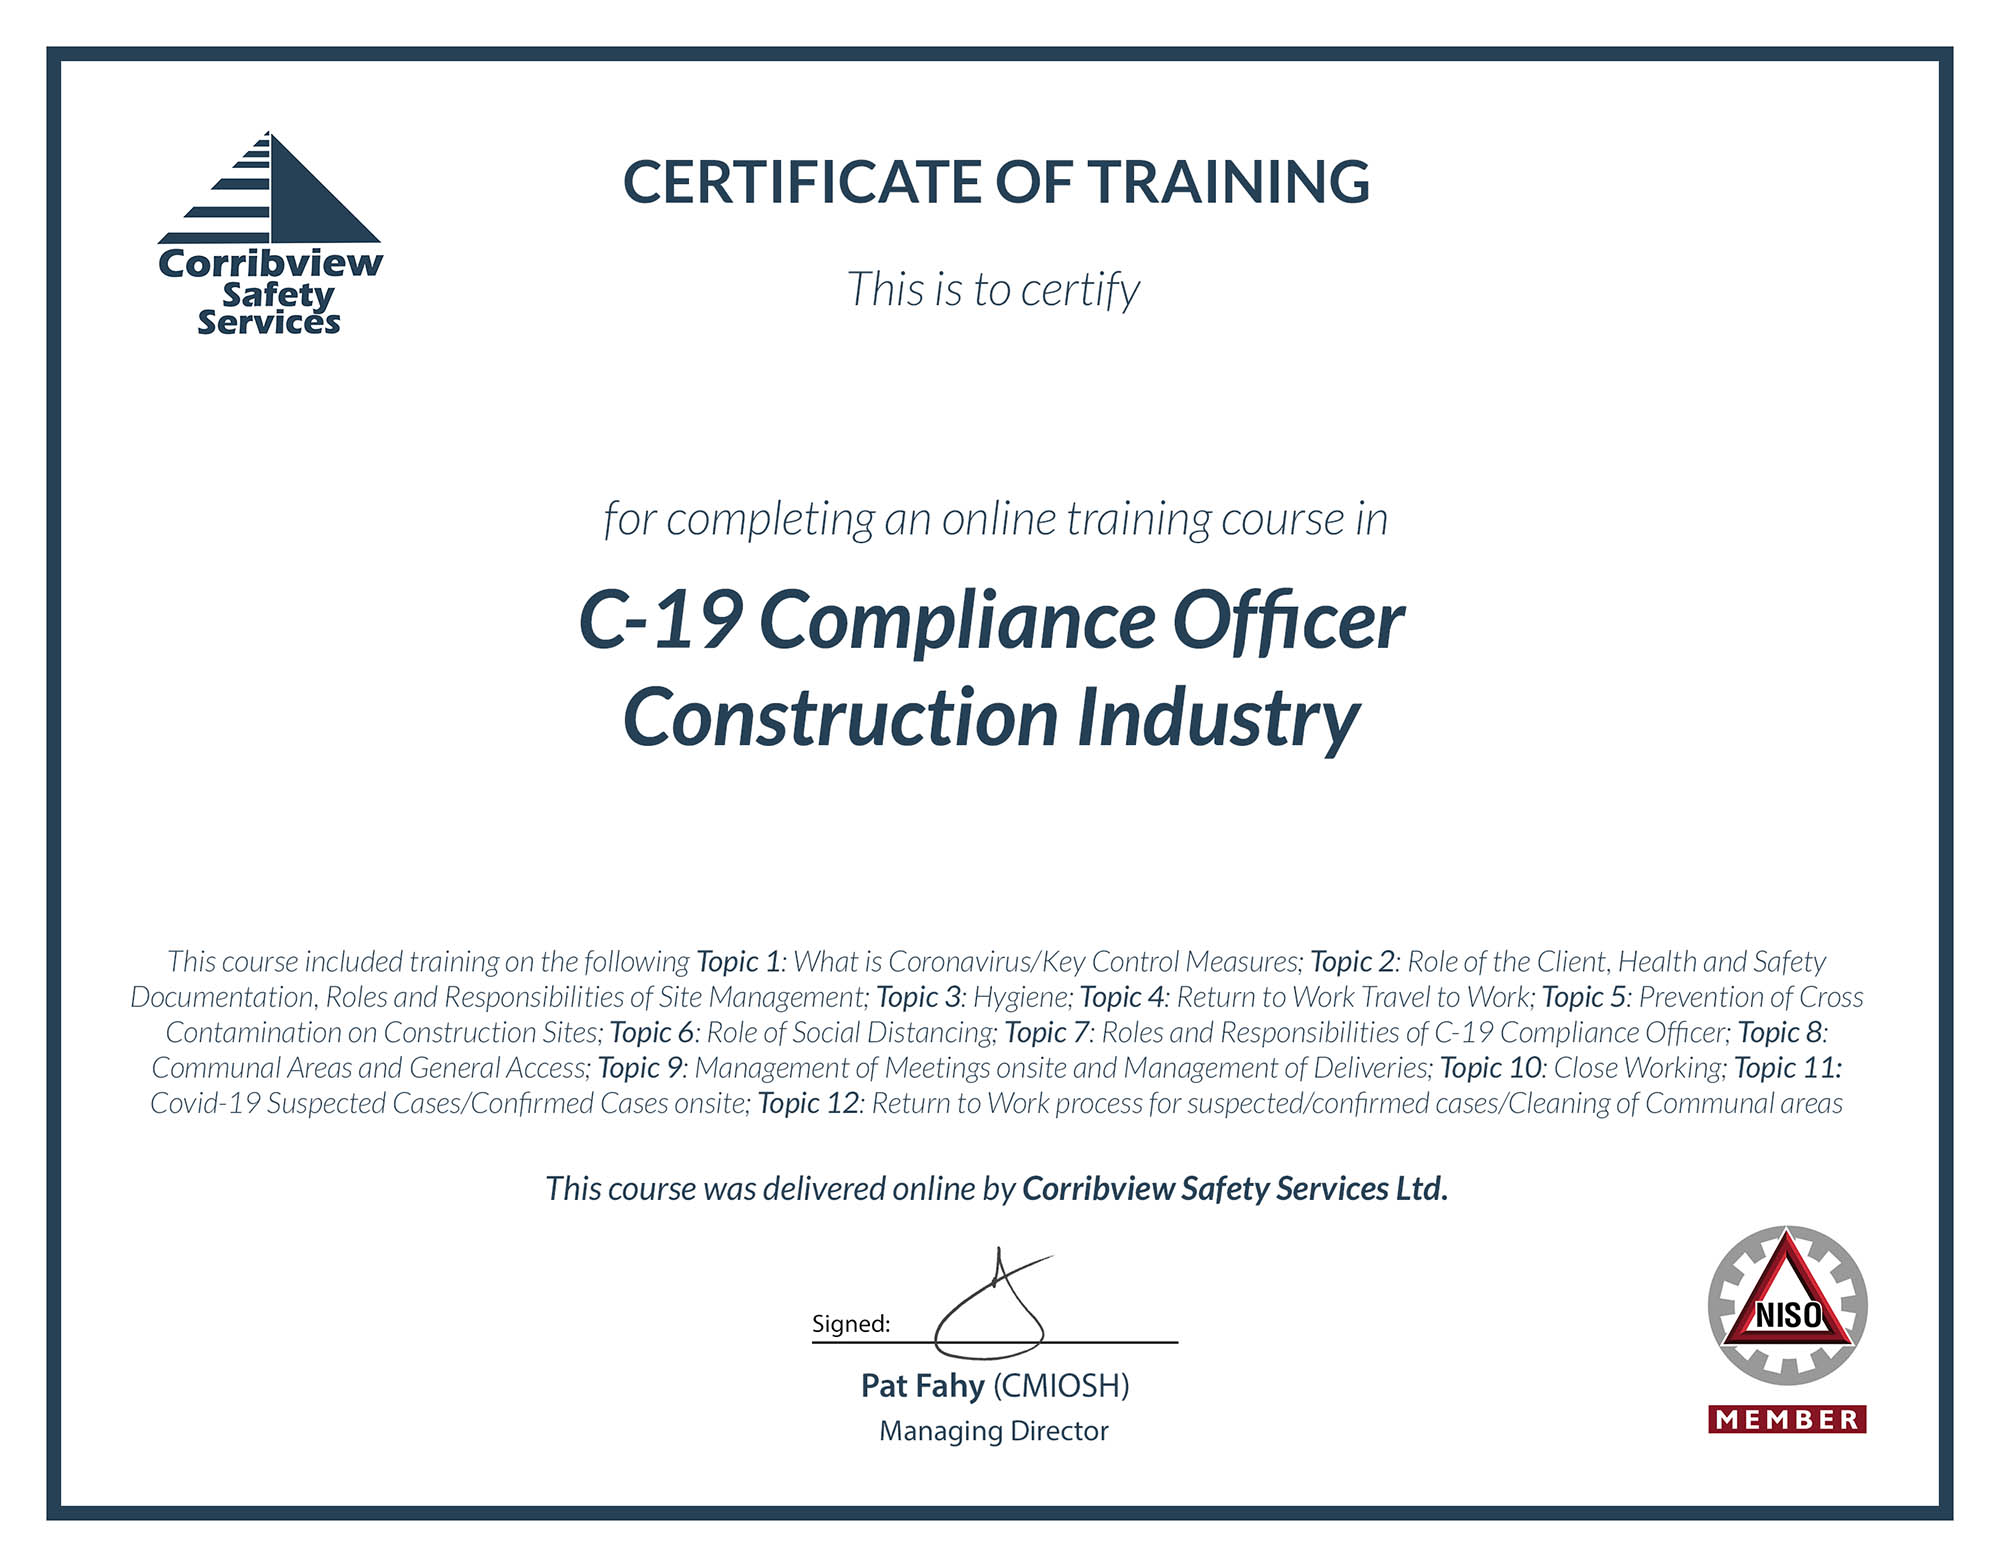 C-19 Compliance Officer Training Construction Industry - Corribview ...